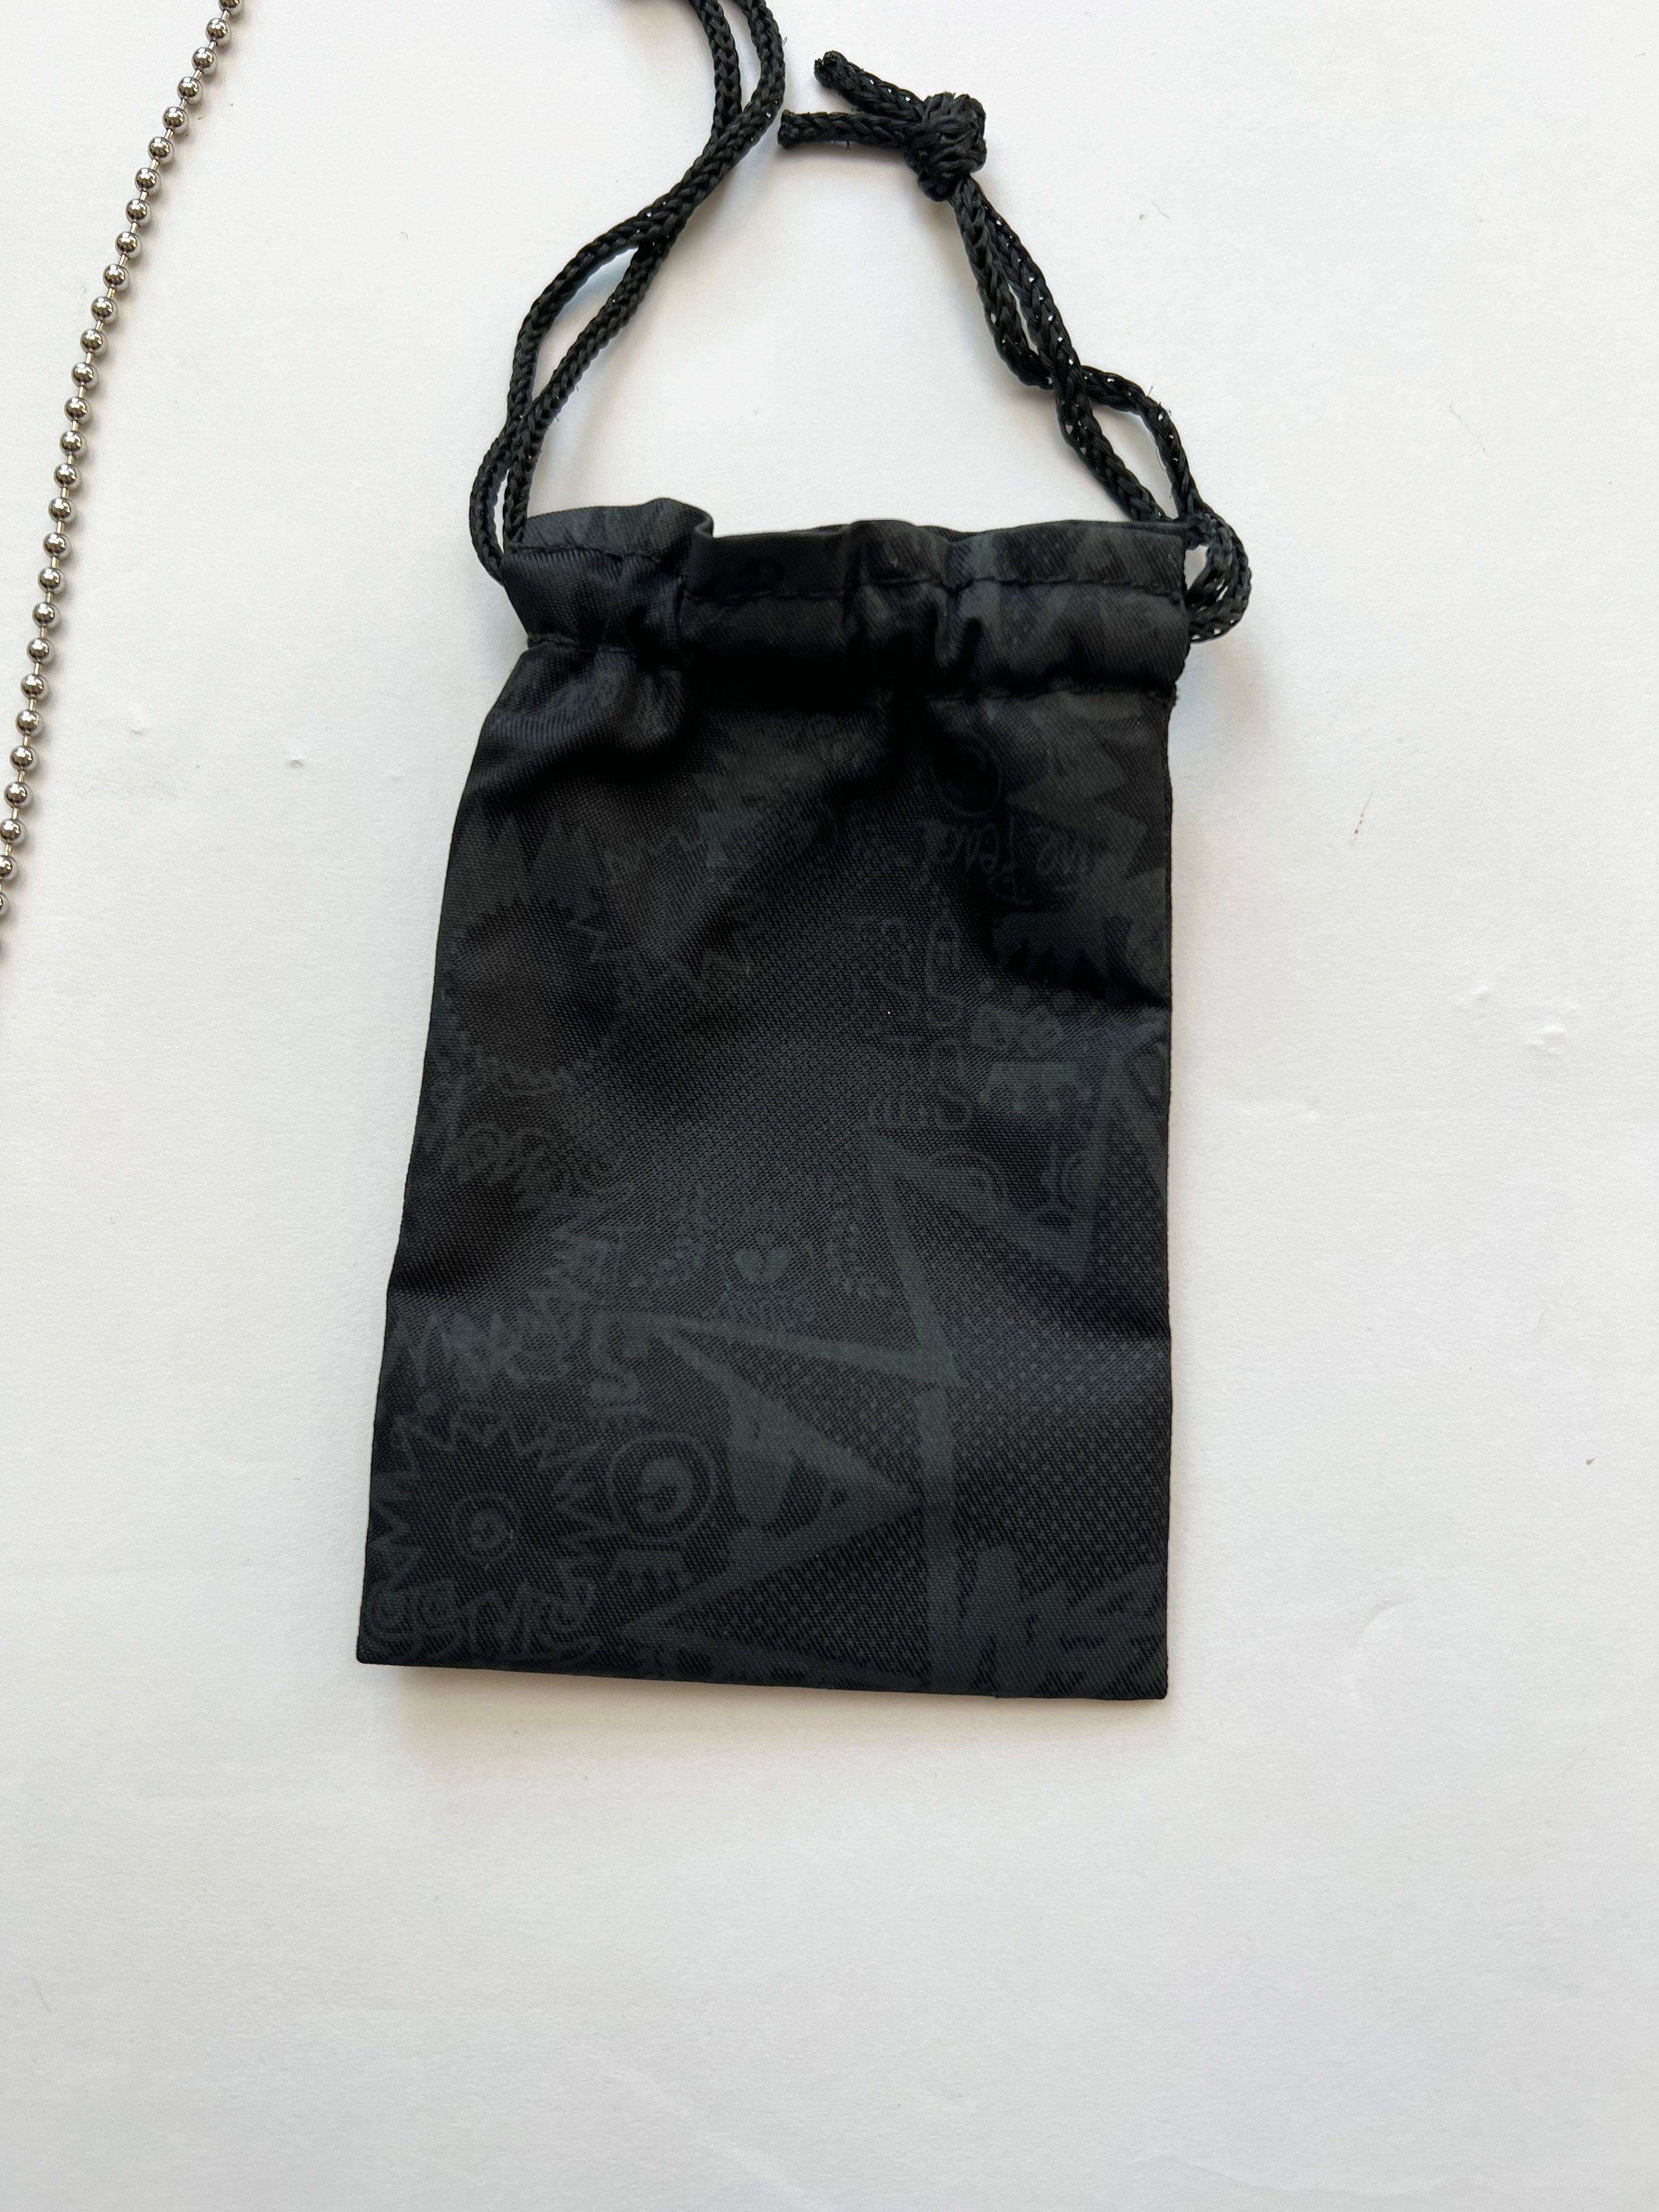 Stussy 'S' Crown Silver Chain